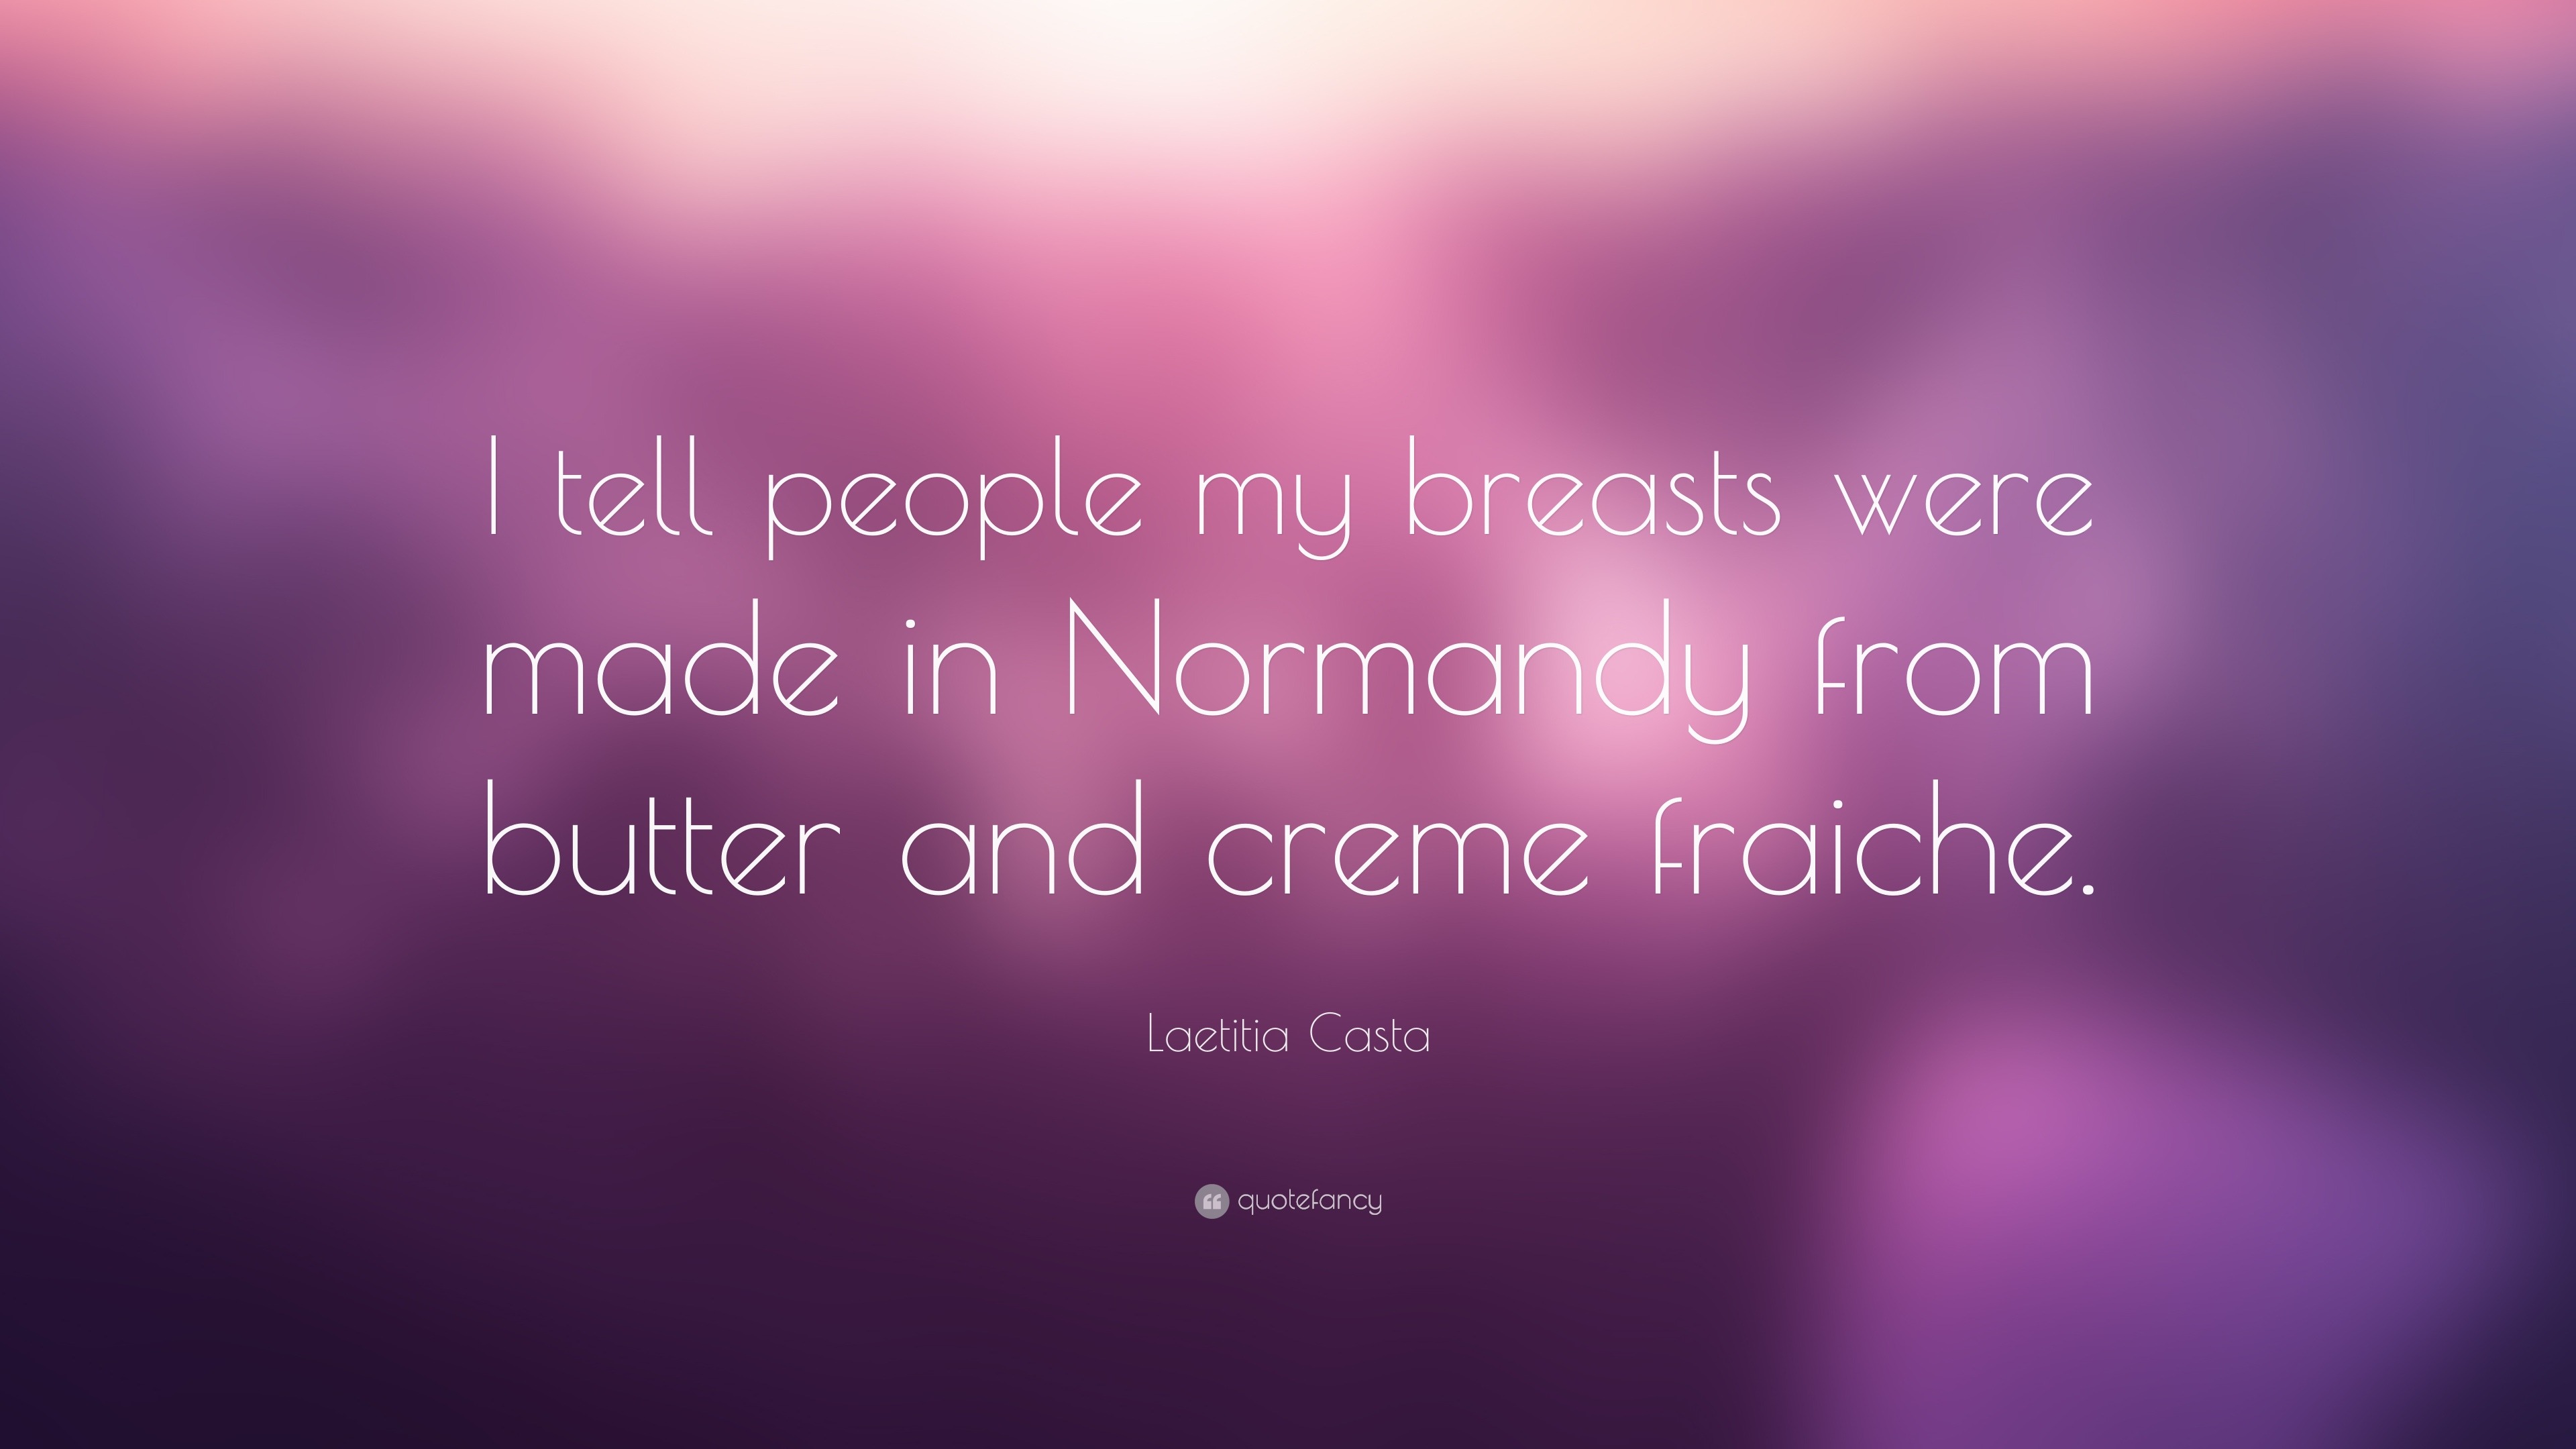 Laetitia Casta Quote: “I tell people my breasts were made in Normandy from  butter and creme